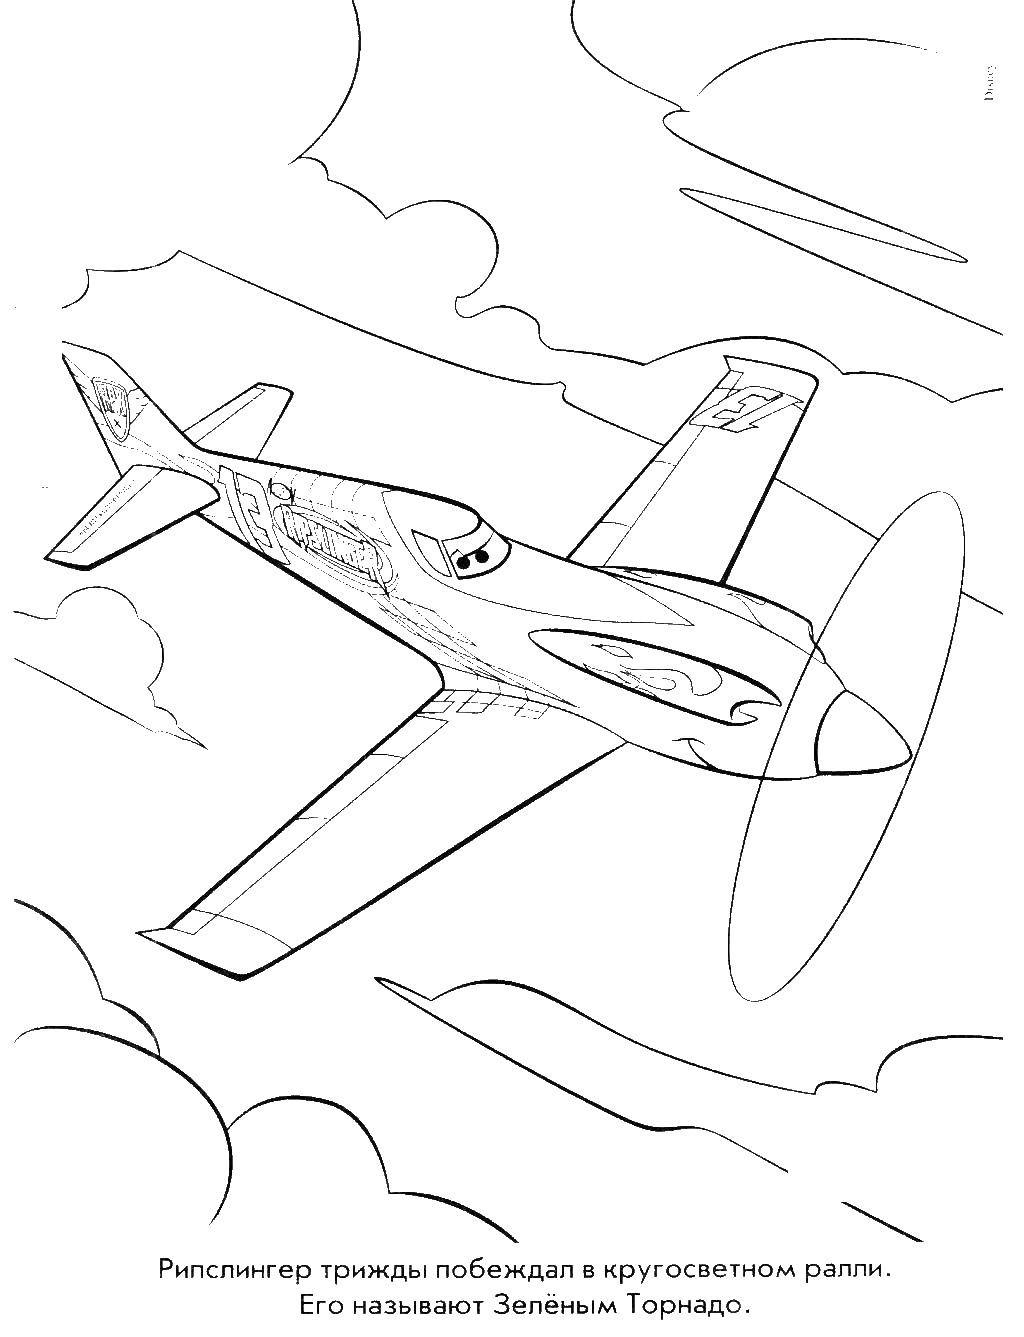 Coloring The plane is ripslinger. Category coloring. Tags:  The Plane, Dusty.